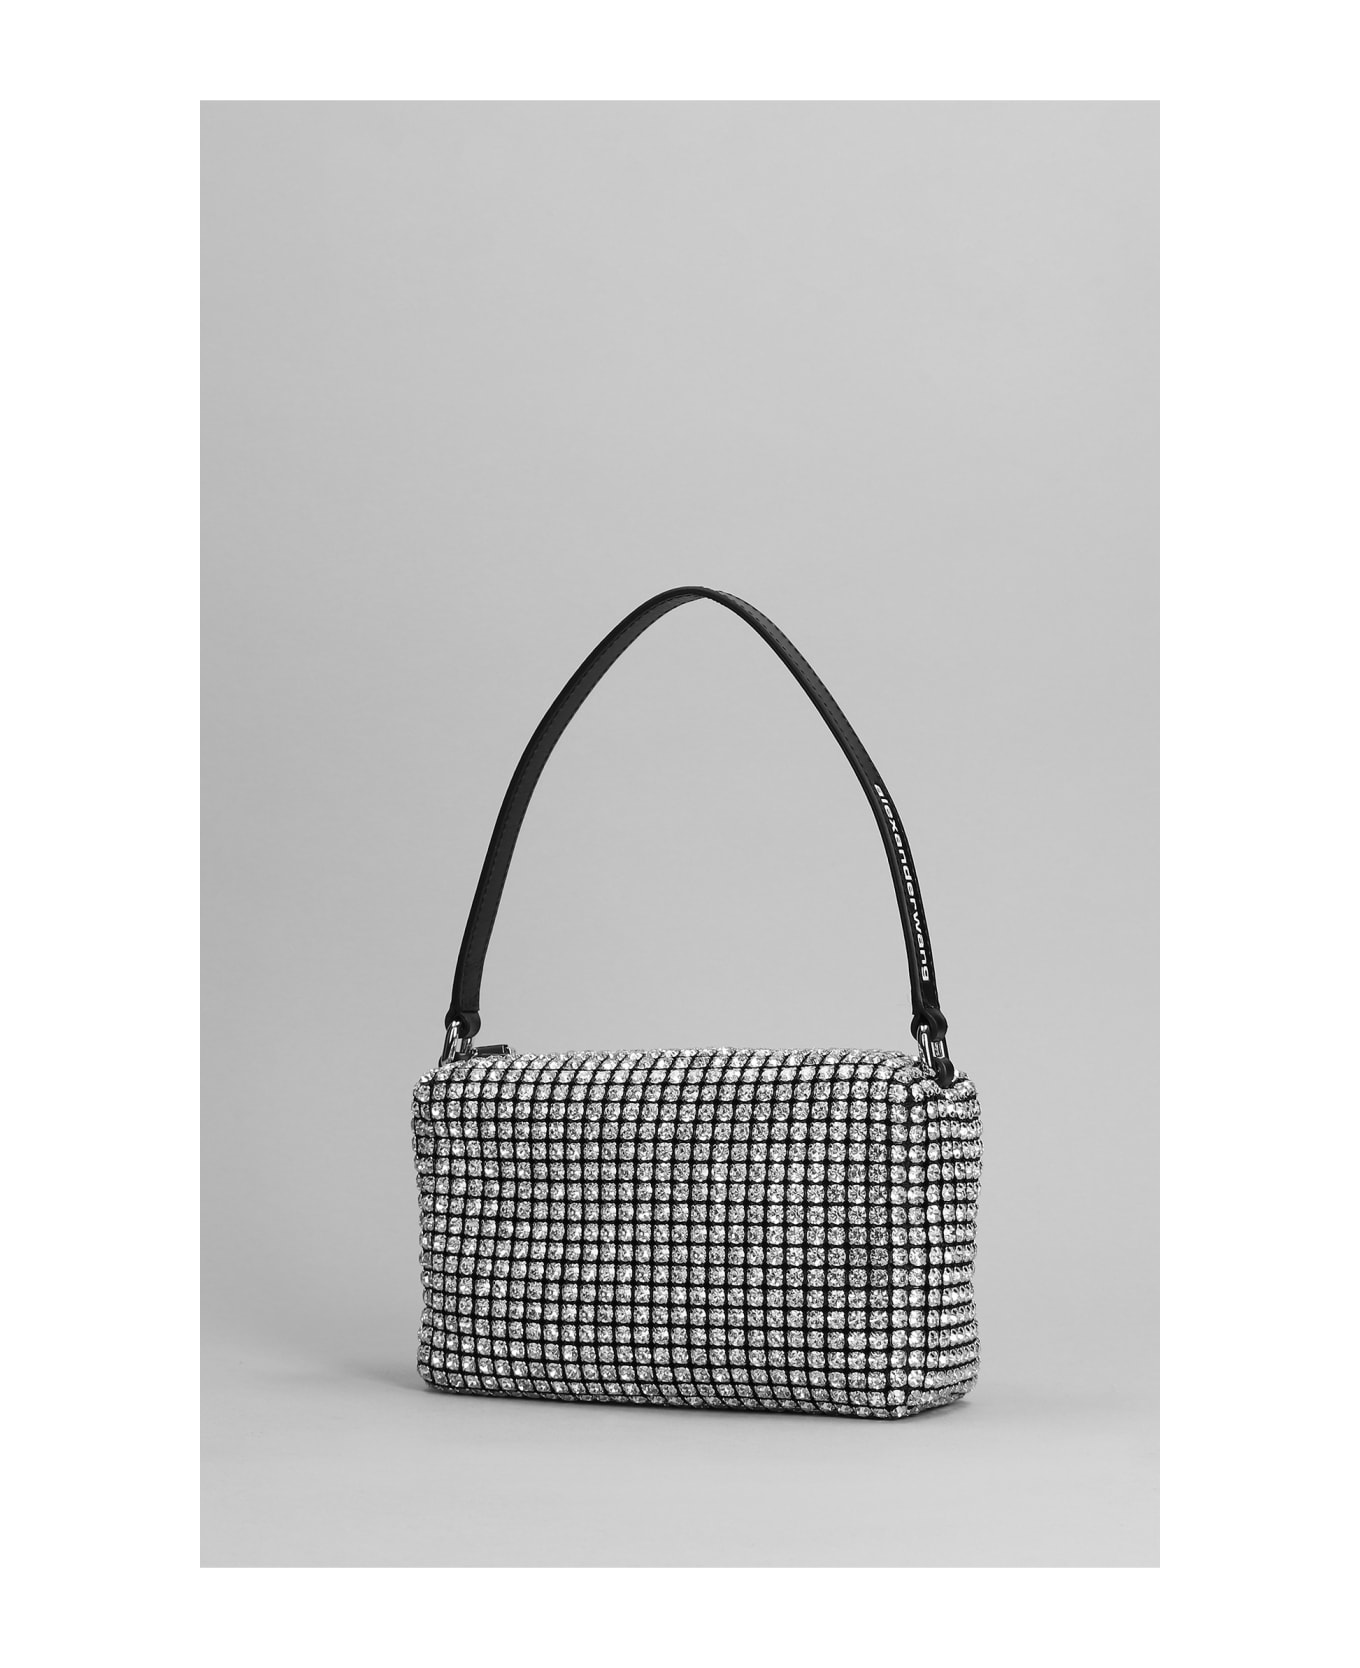 Alexander Wang Heiress Hand Bag In White Leather - white